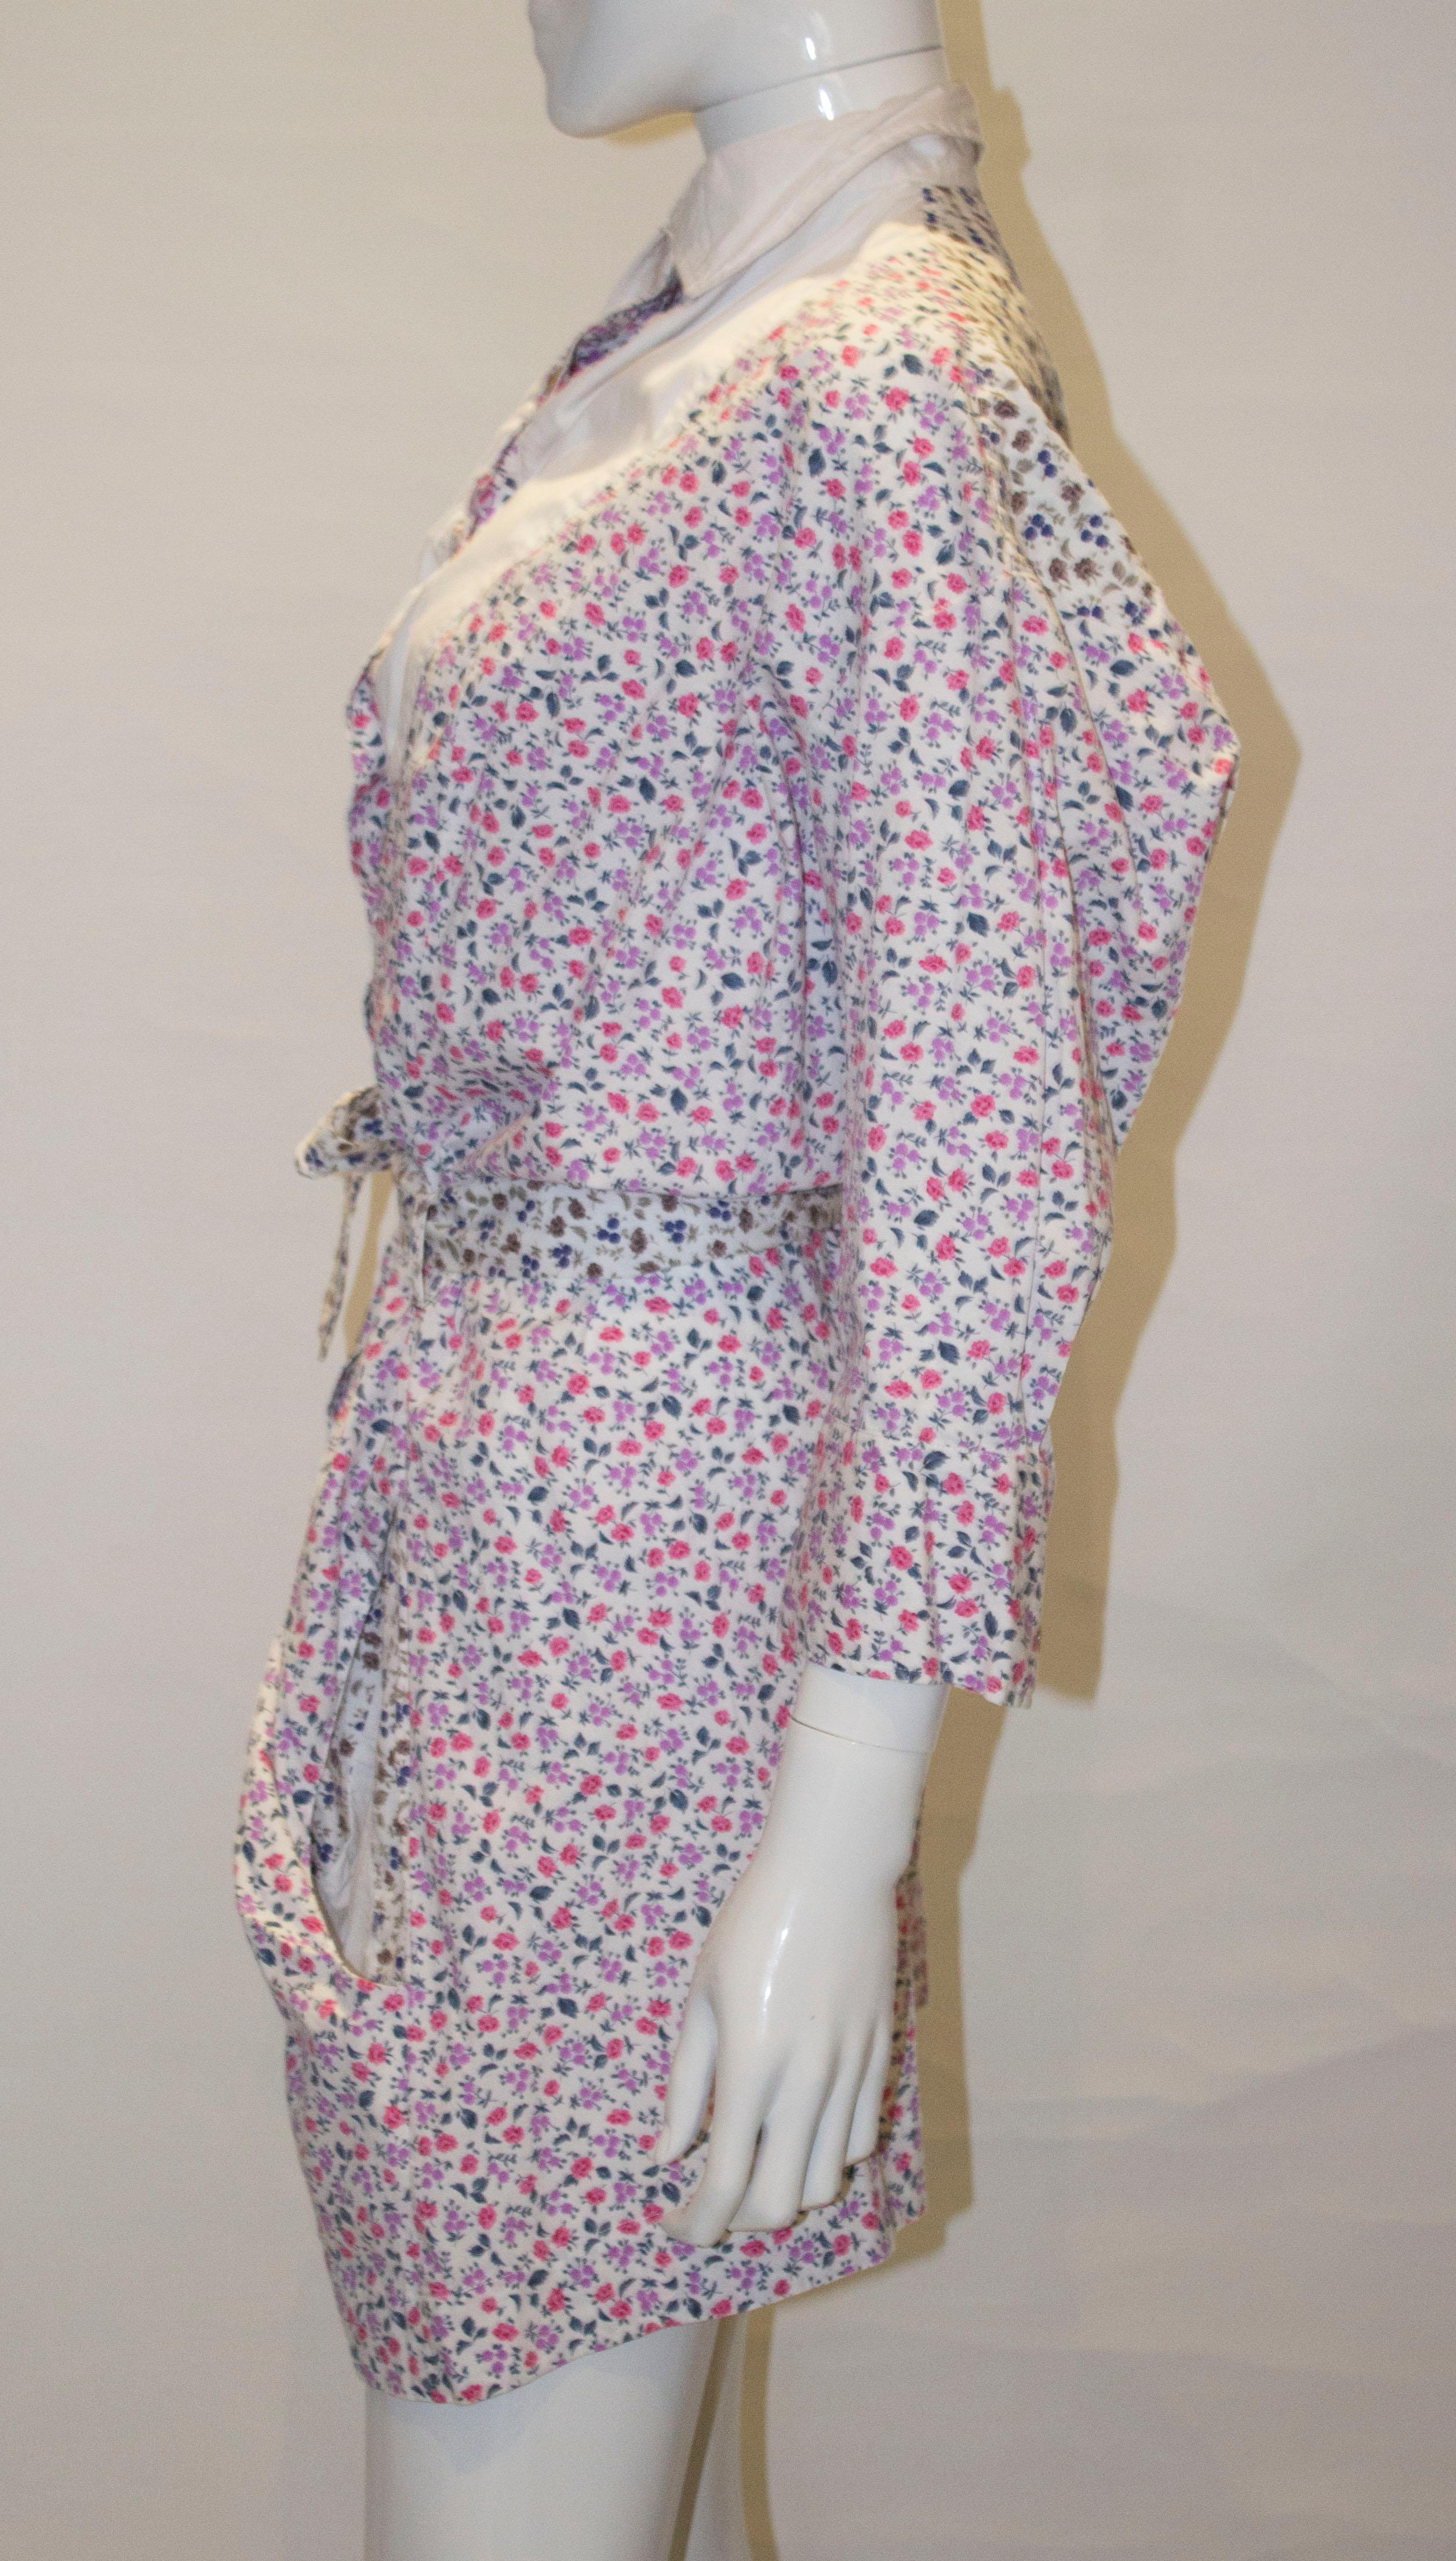 Vivienne Westwood Floral Cotton Playsuit In Good Condition For Sale In London, GB